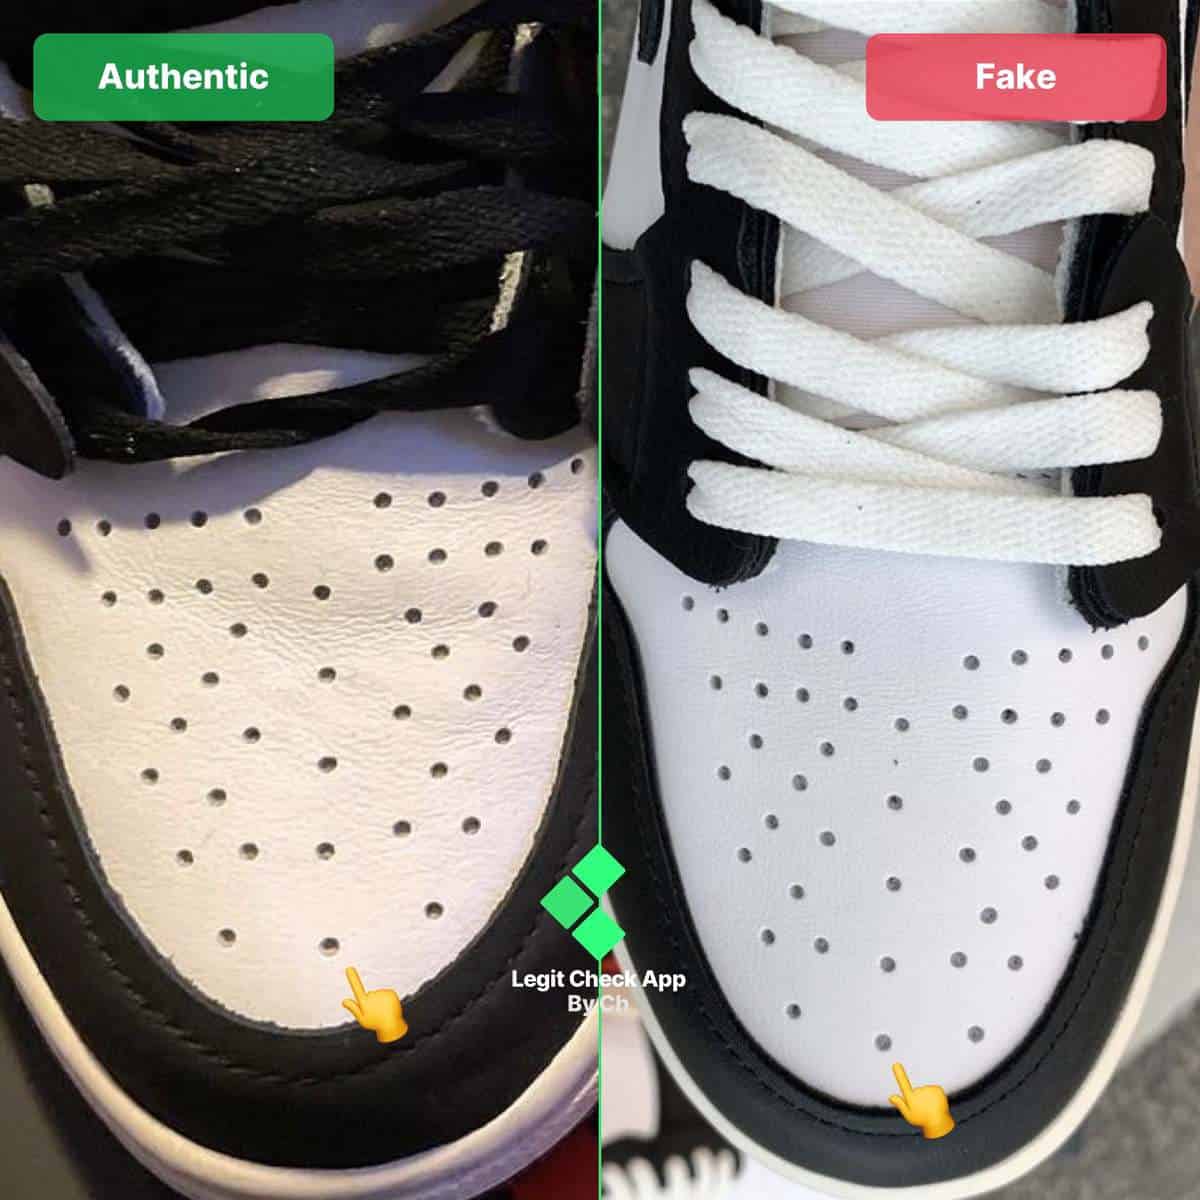 Air Jordan 1 Volt Gold Fake Vs Real Guide Authenticity Check Legit Check By Ch